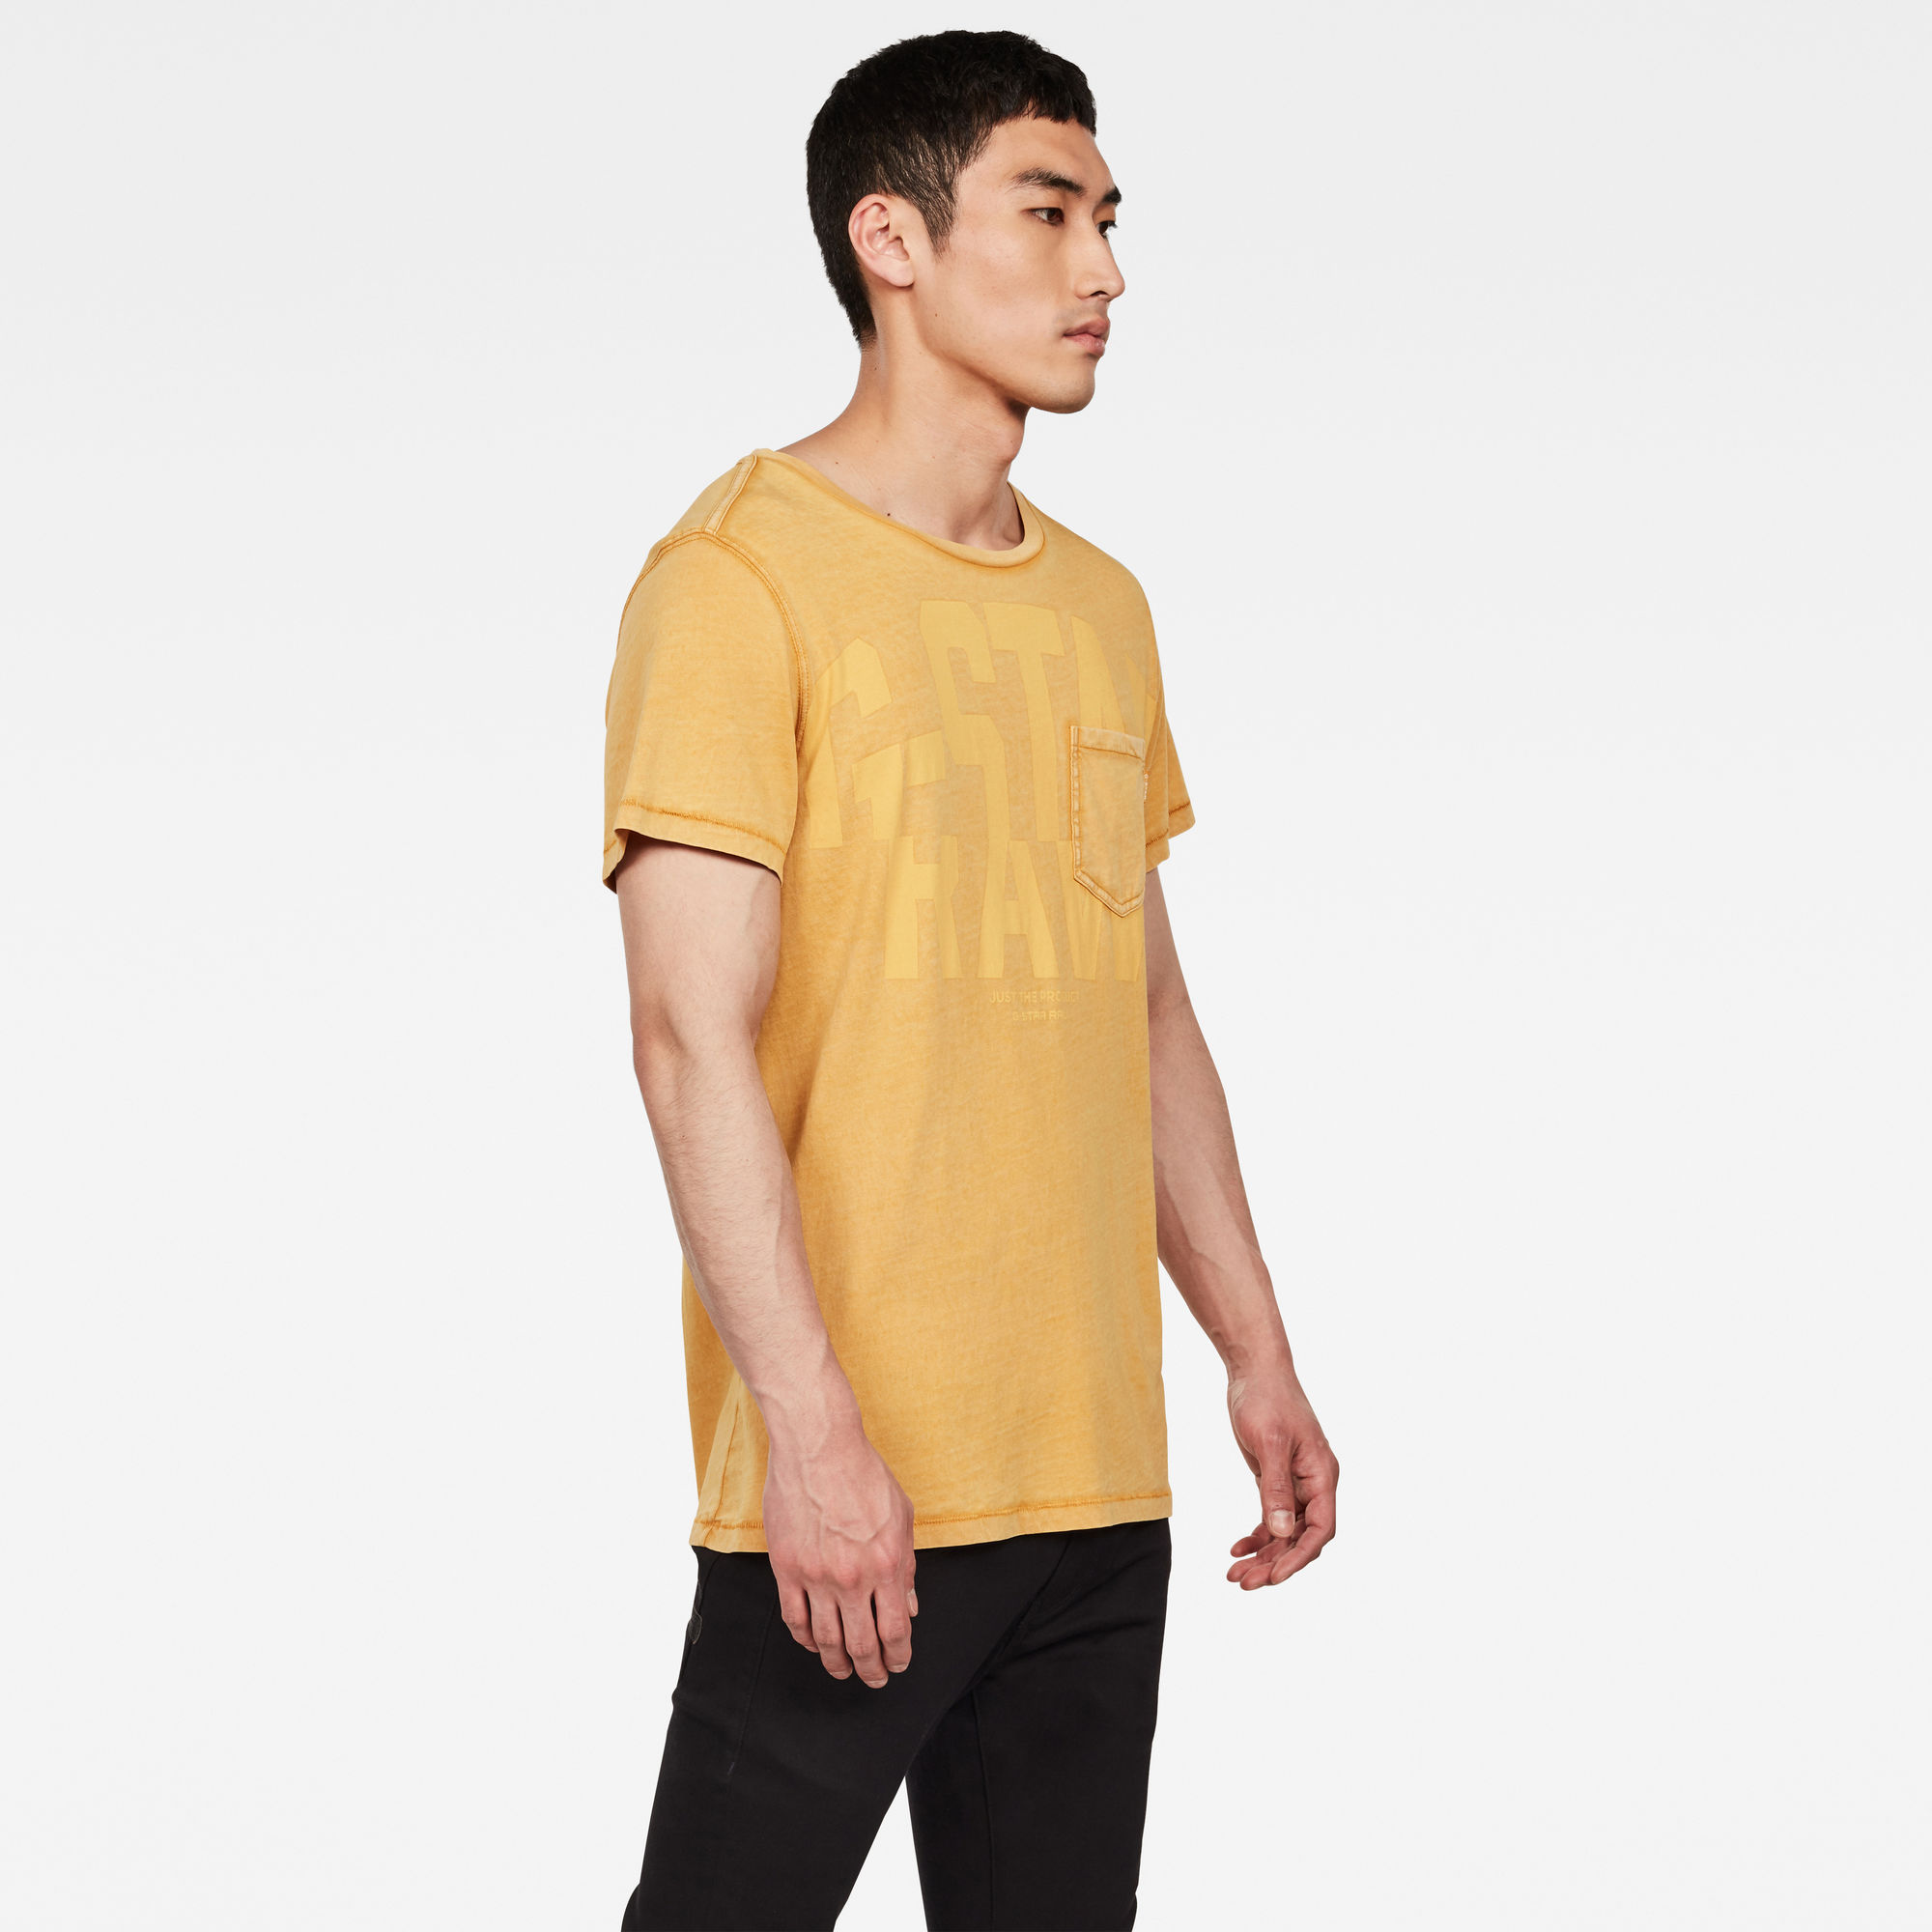 graphic tees yellow